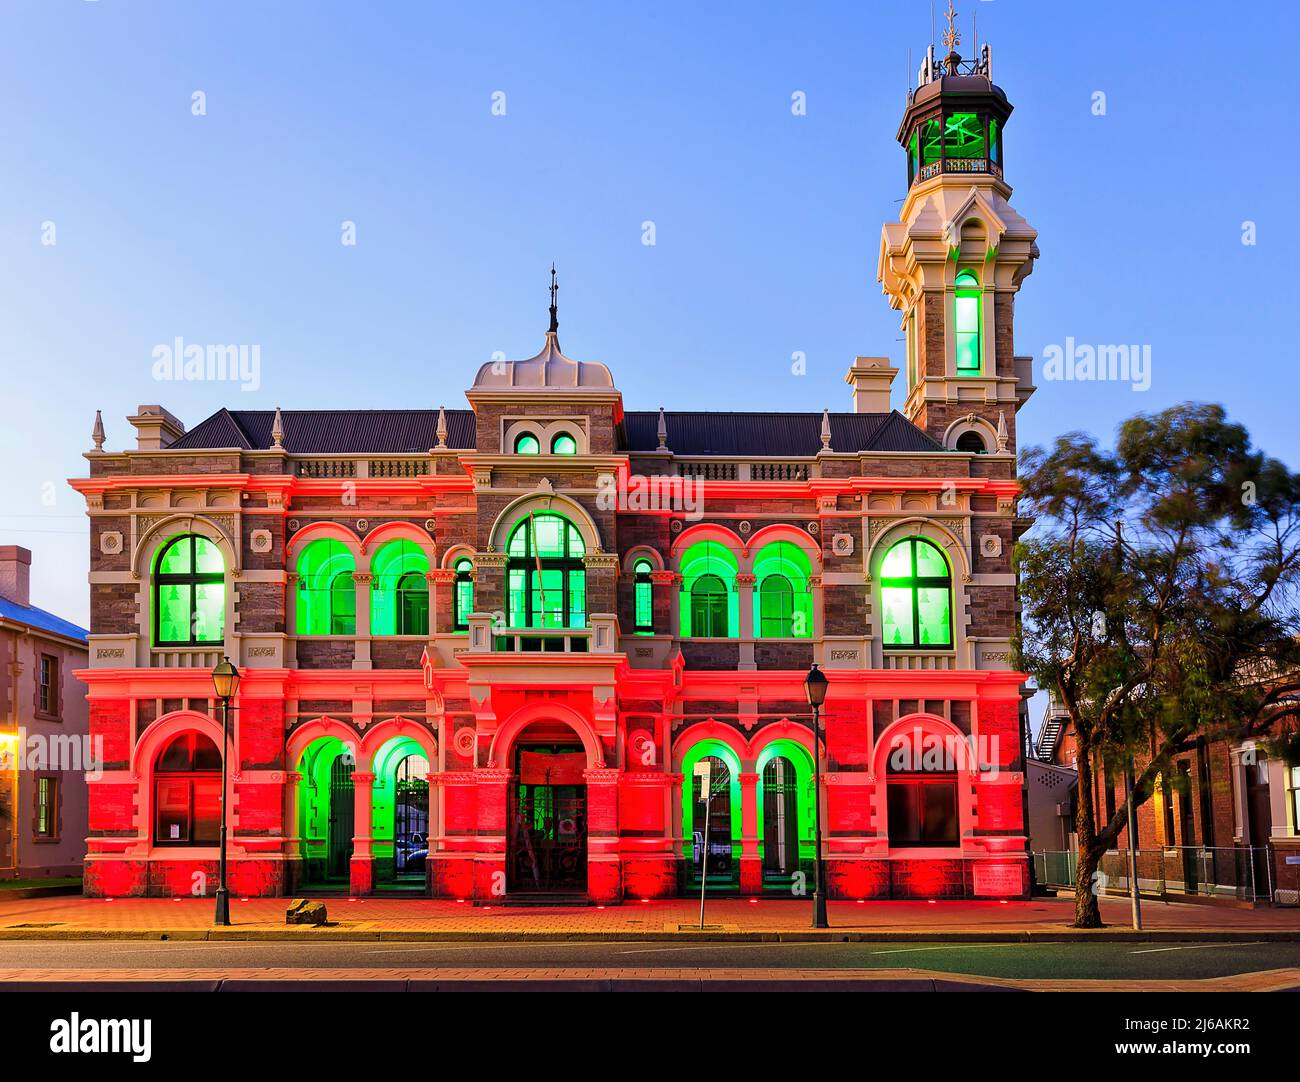 Green red illumination lighs on historic town hall building in Broken Hill city of outback Australia at sunset. Stock Photo